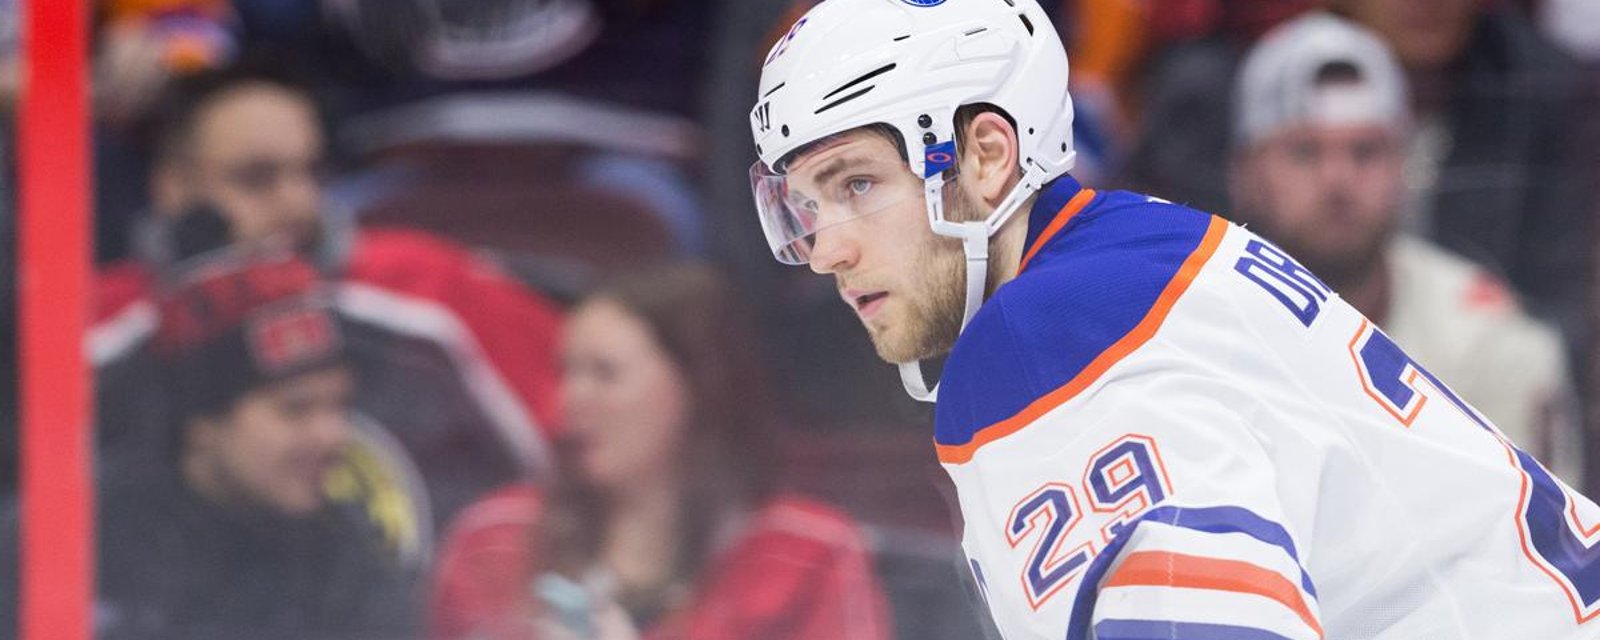 Report: Draisaitl's injury may be a serious cause for concern